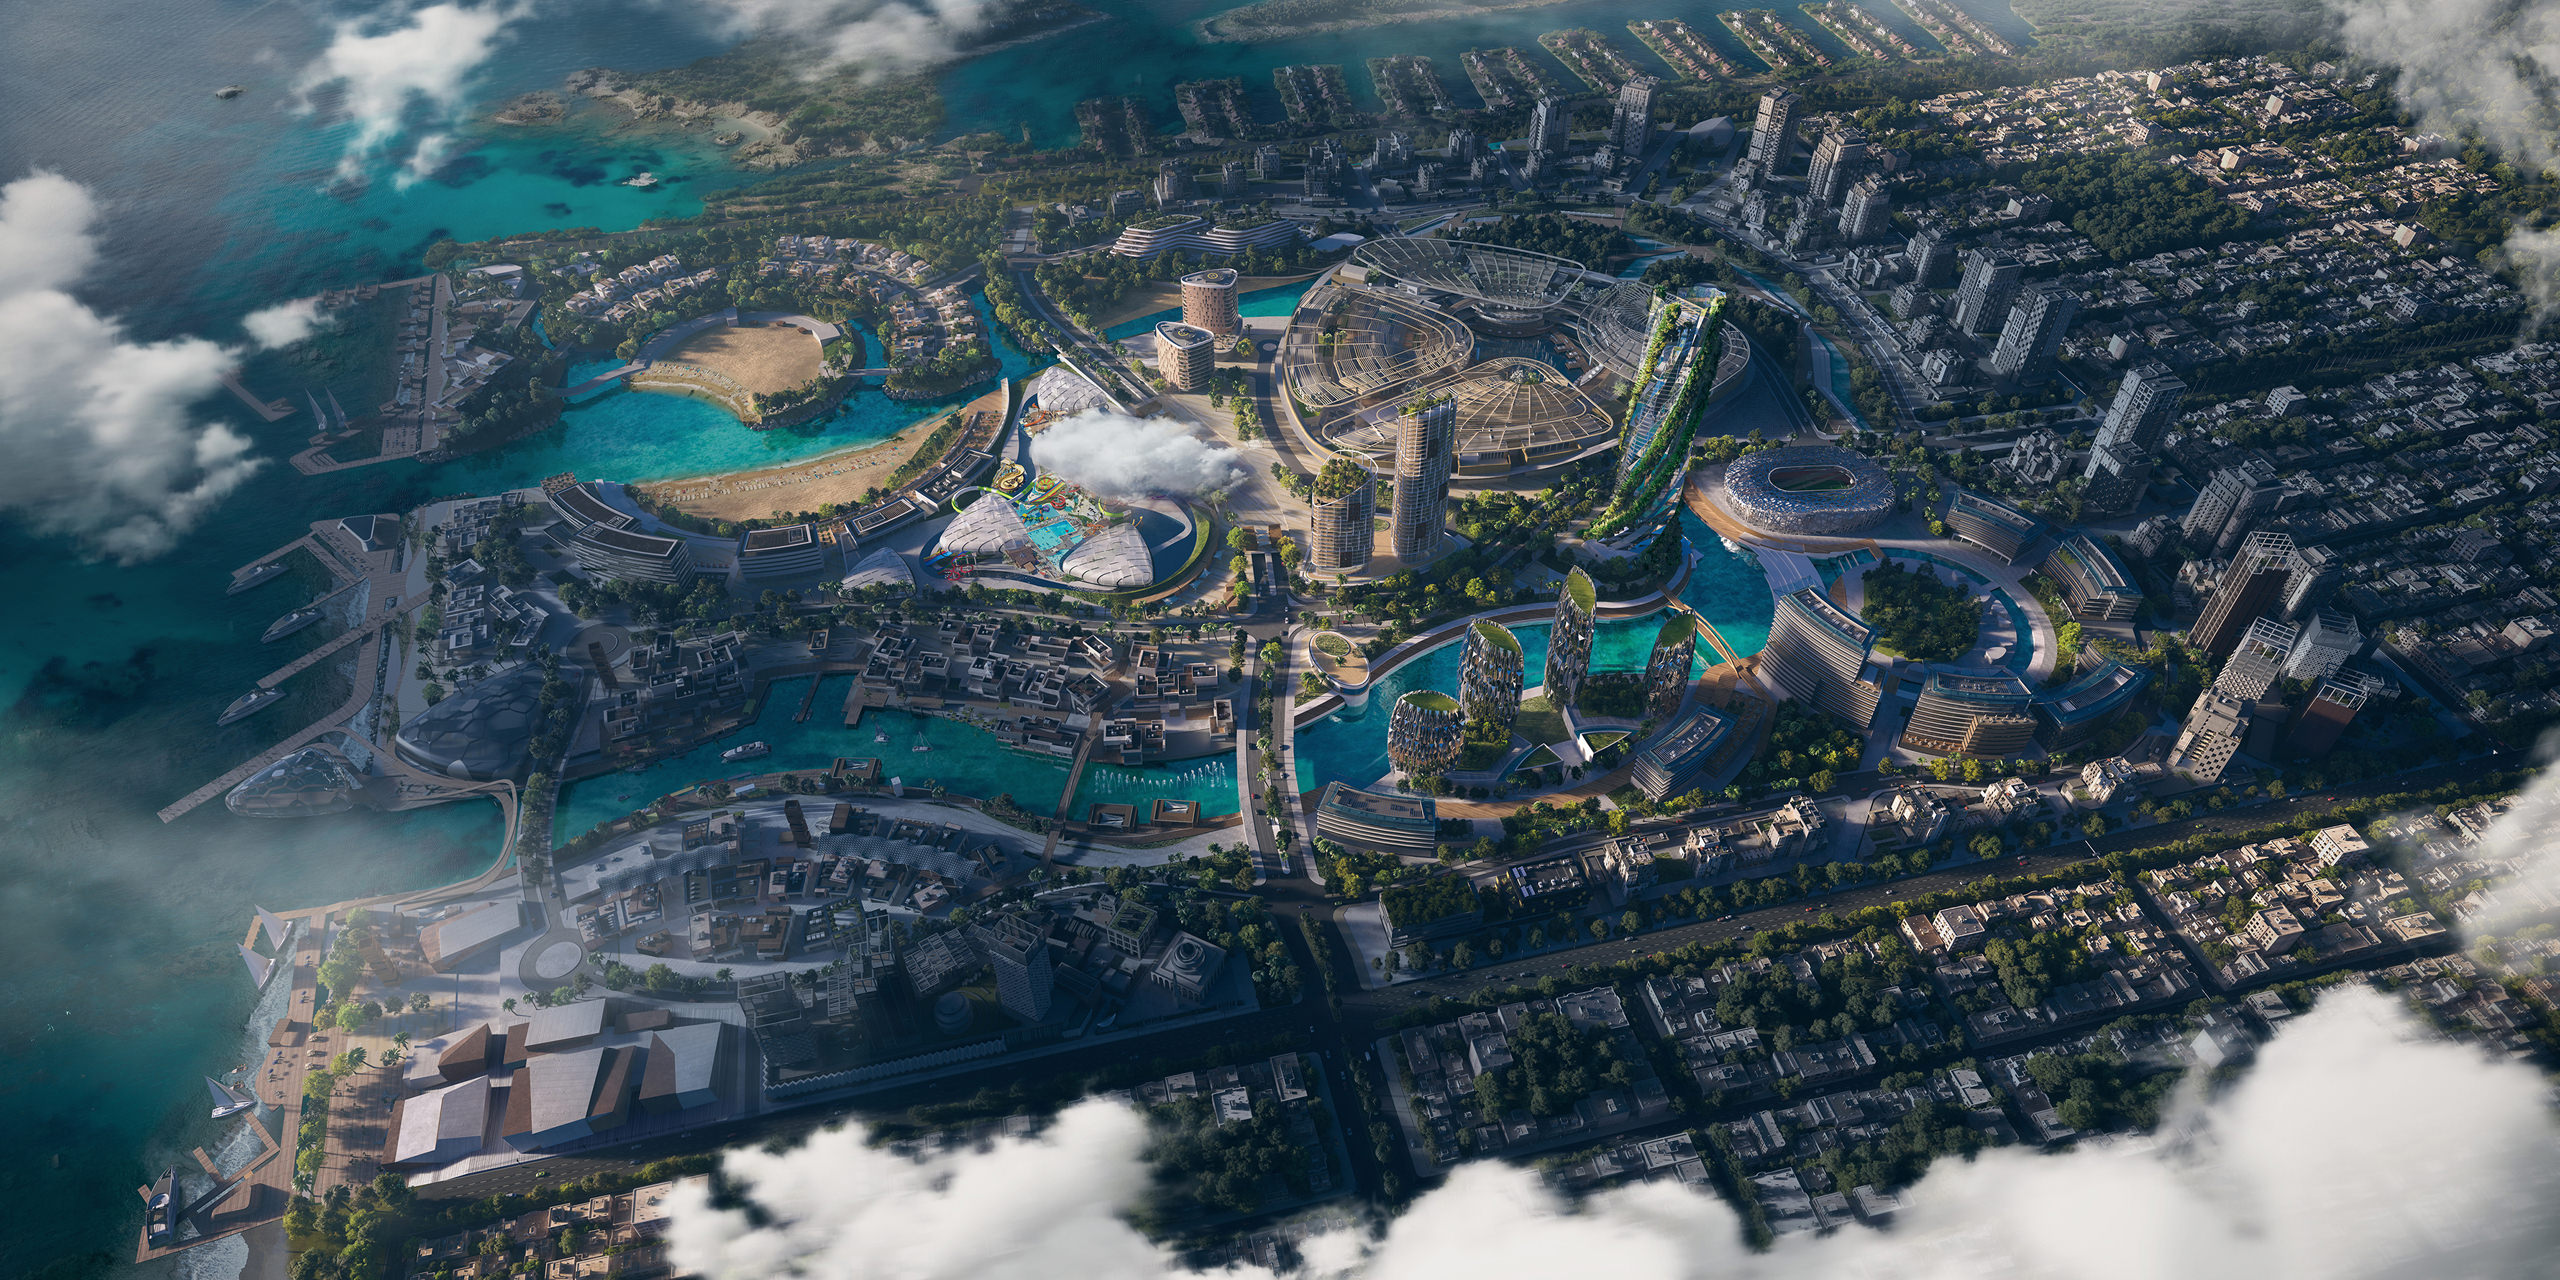 Aerial view created with the help of CG of multiple skyscrapers surrounded by a water park in the context of a developed futuristic residential district on the Red Sea